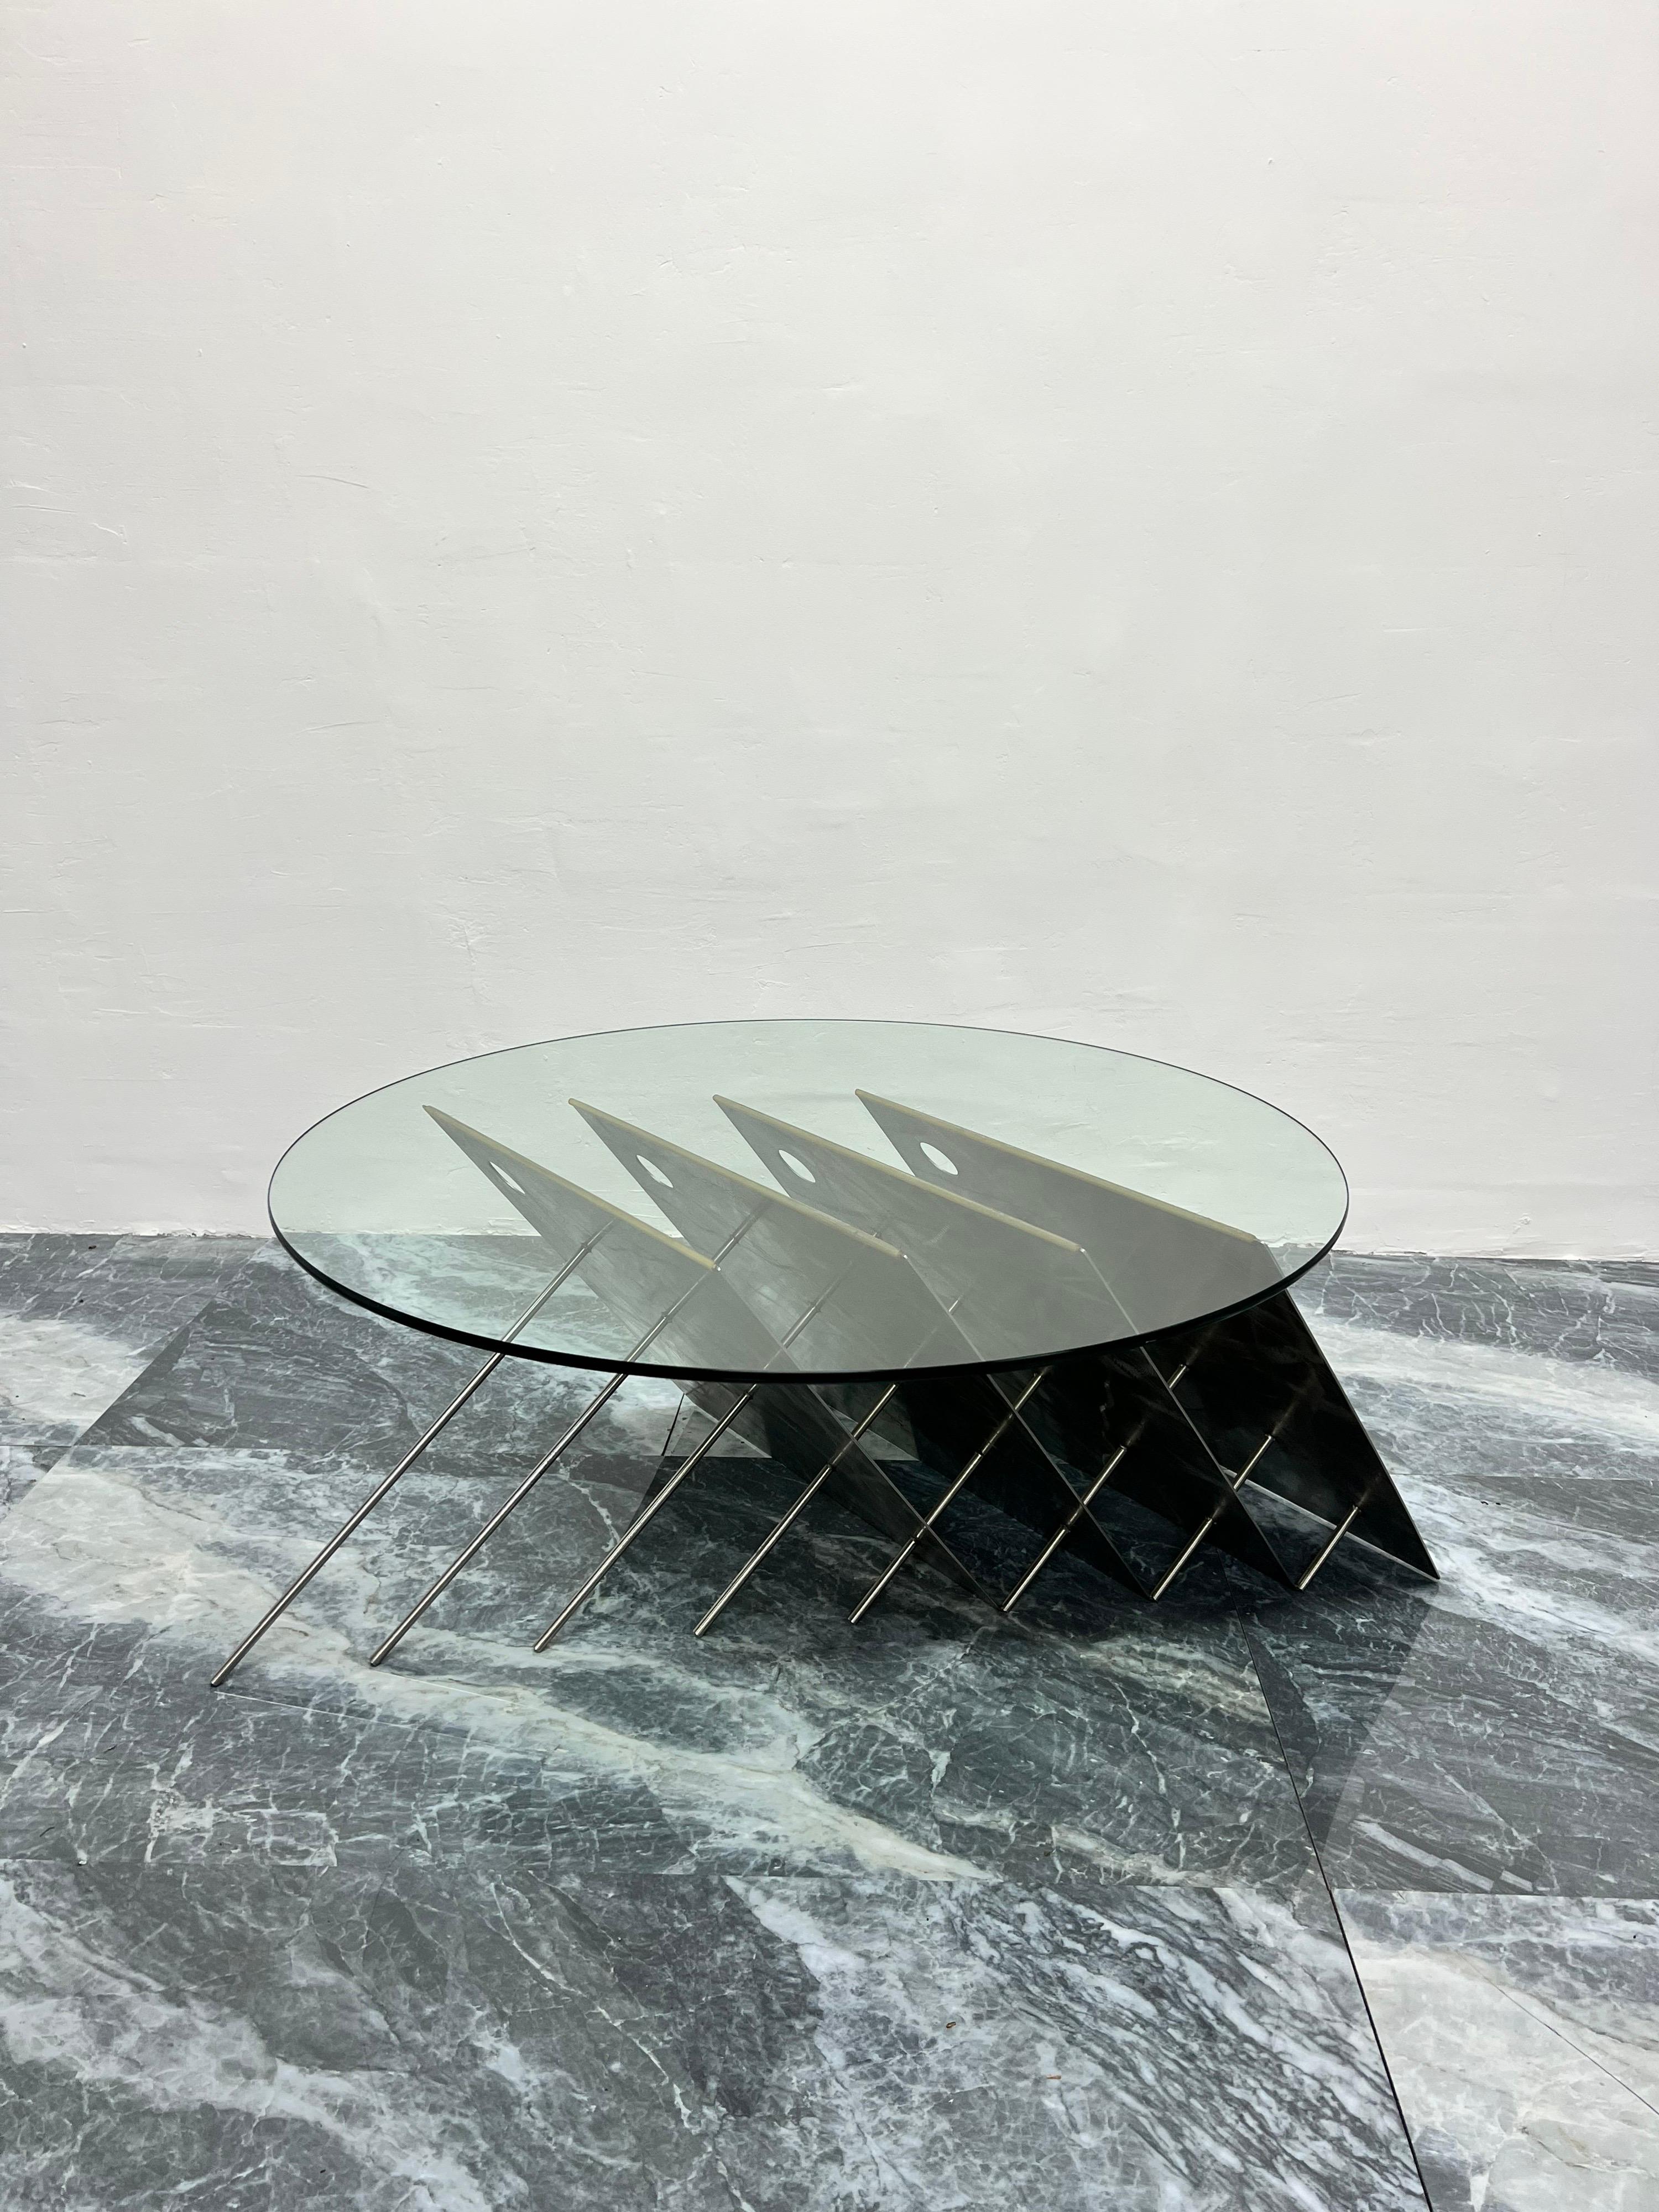 American Contemporary Custom Made Steel and Glass Art Coffee Table, USA 1990s For Sale 3